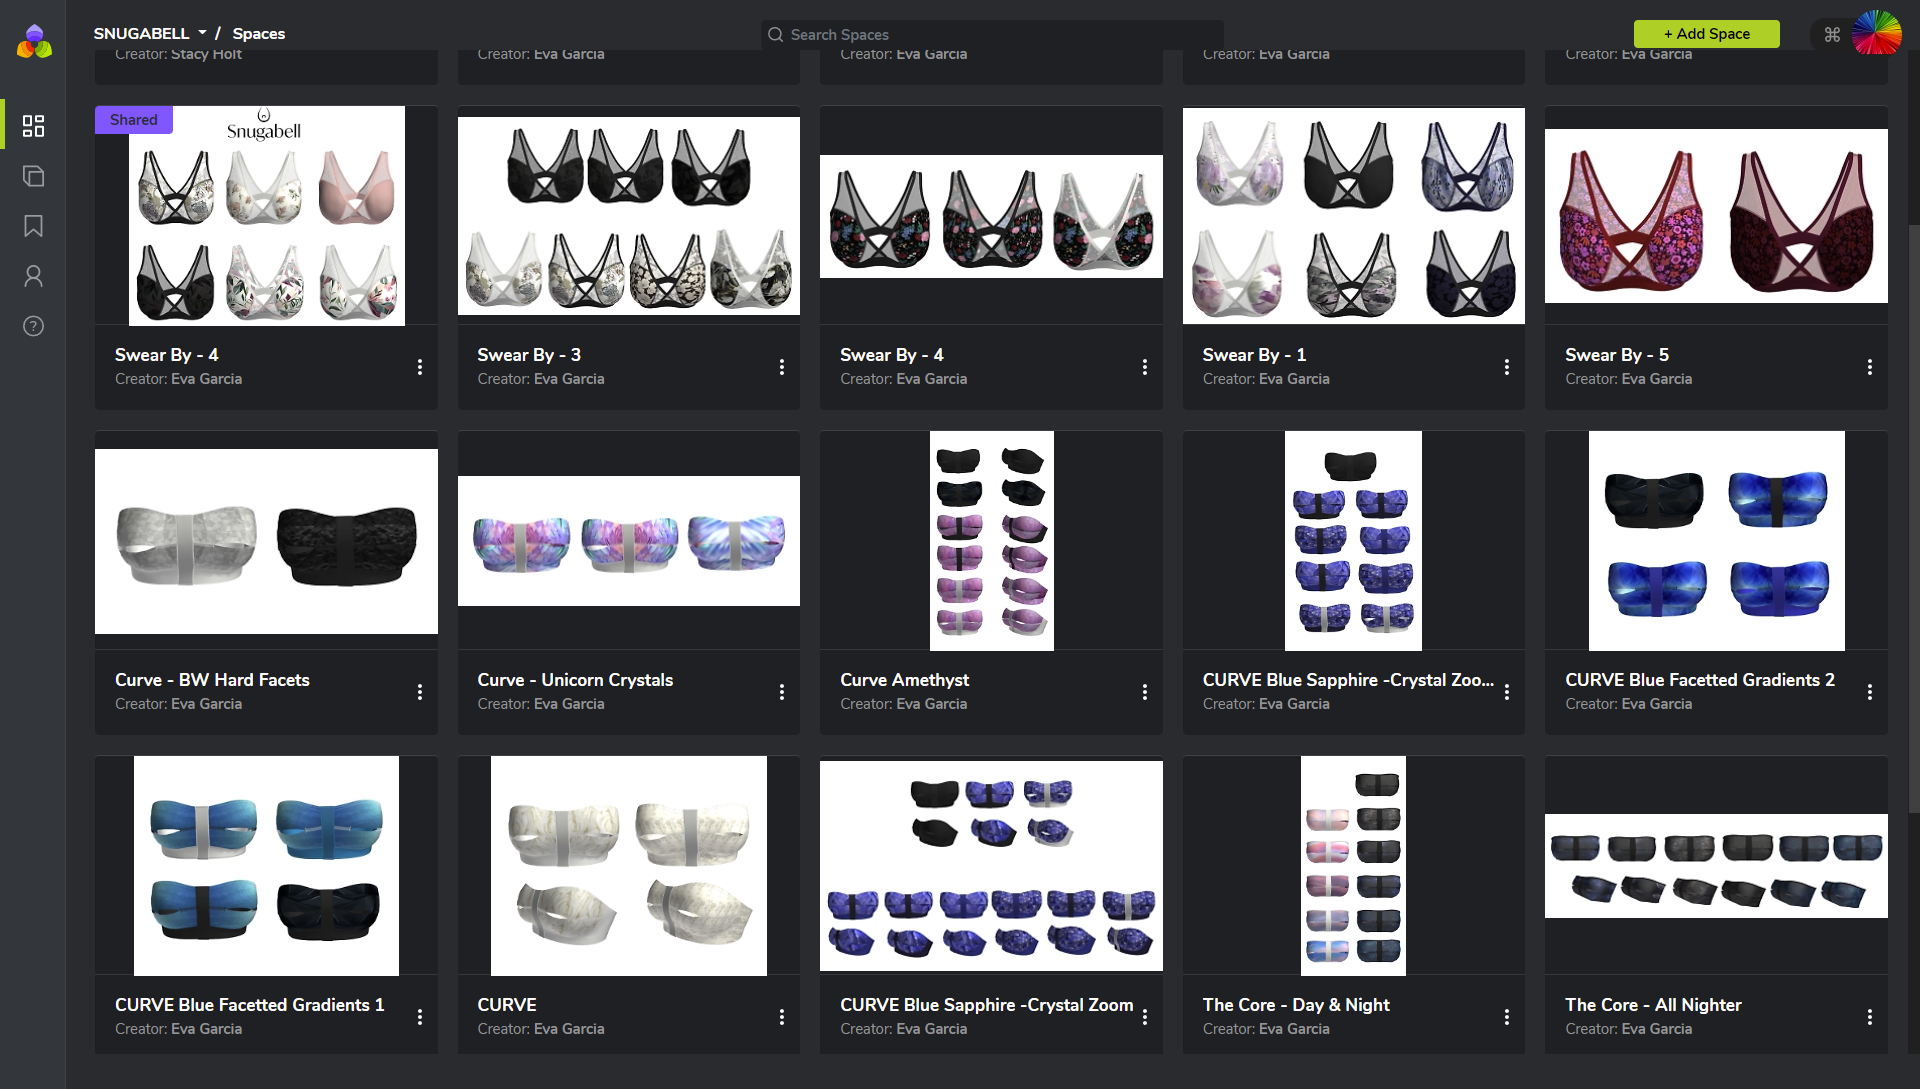 Some of Snugabell's product lines in Orchids' Spaces and accessible from any web browser